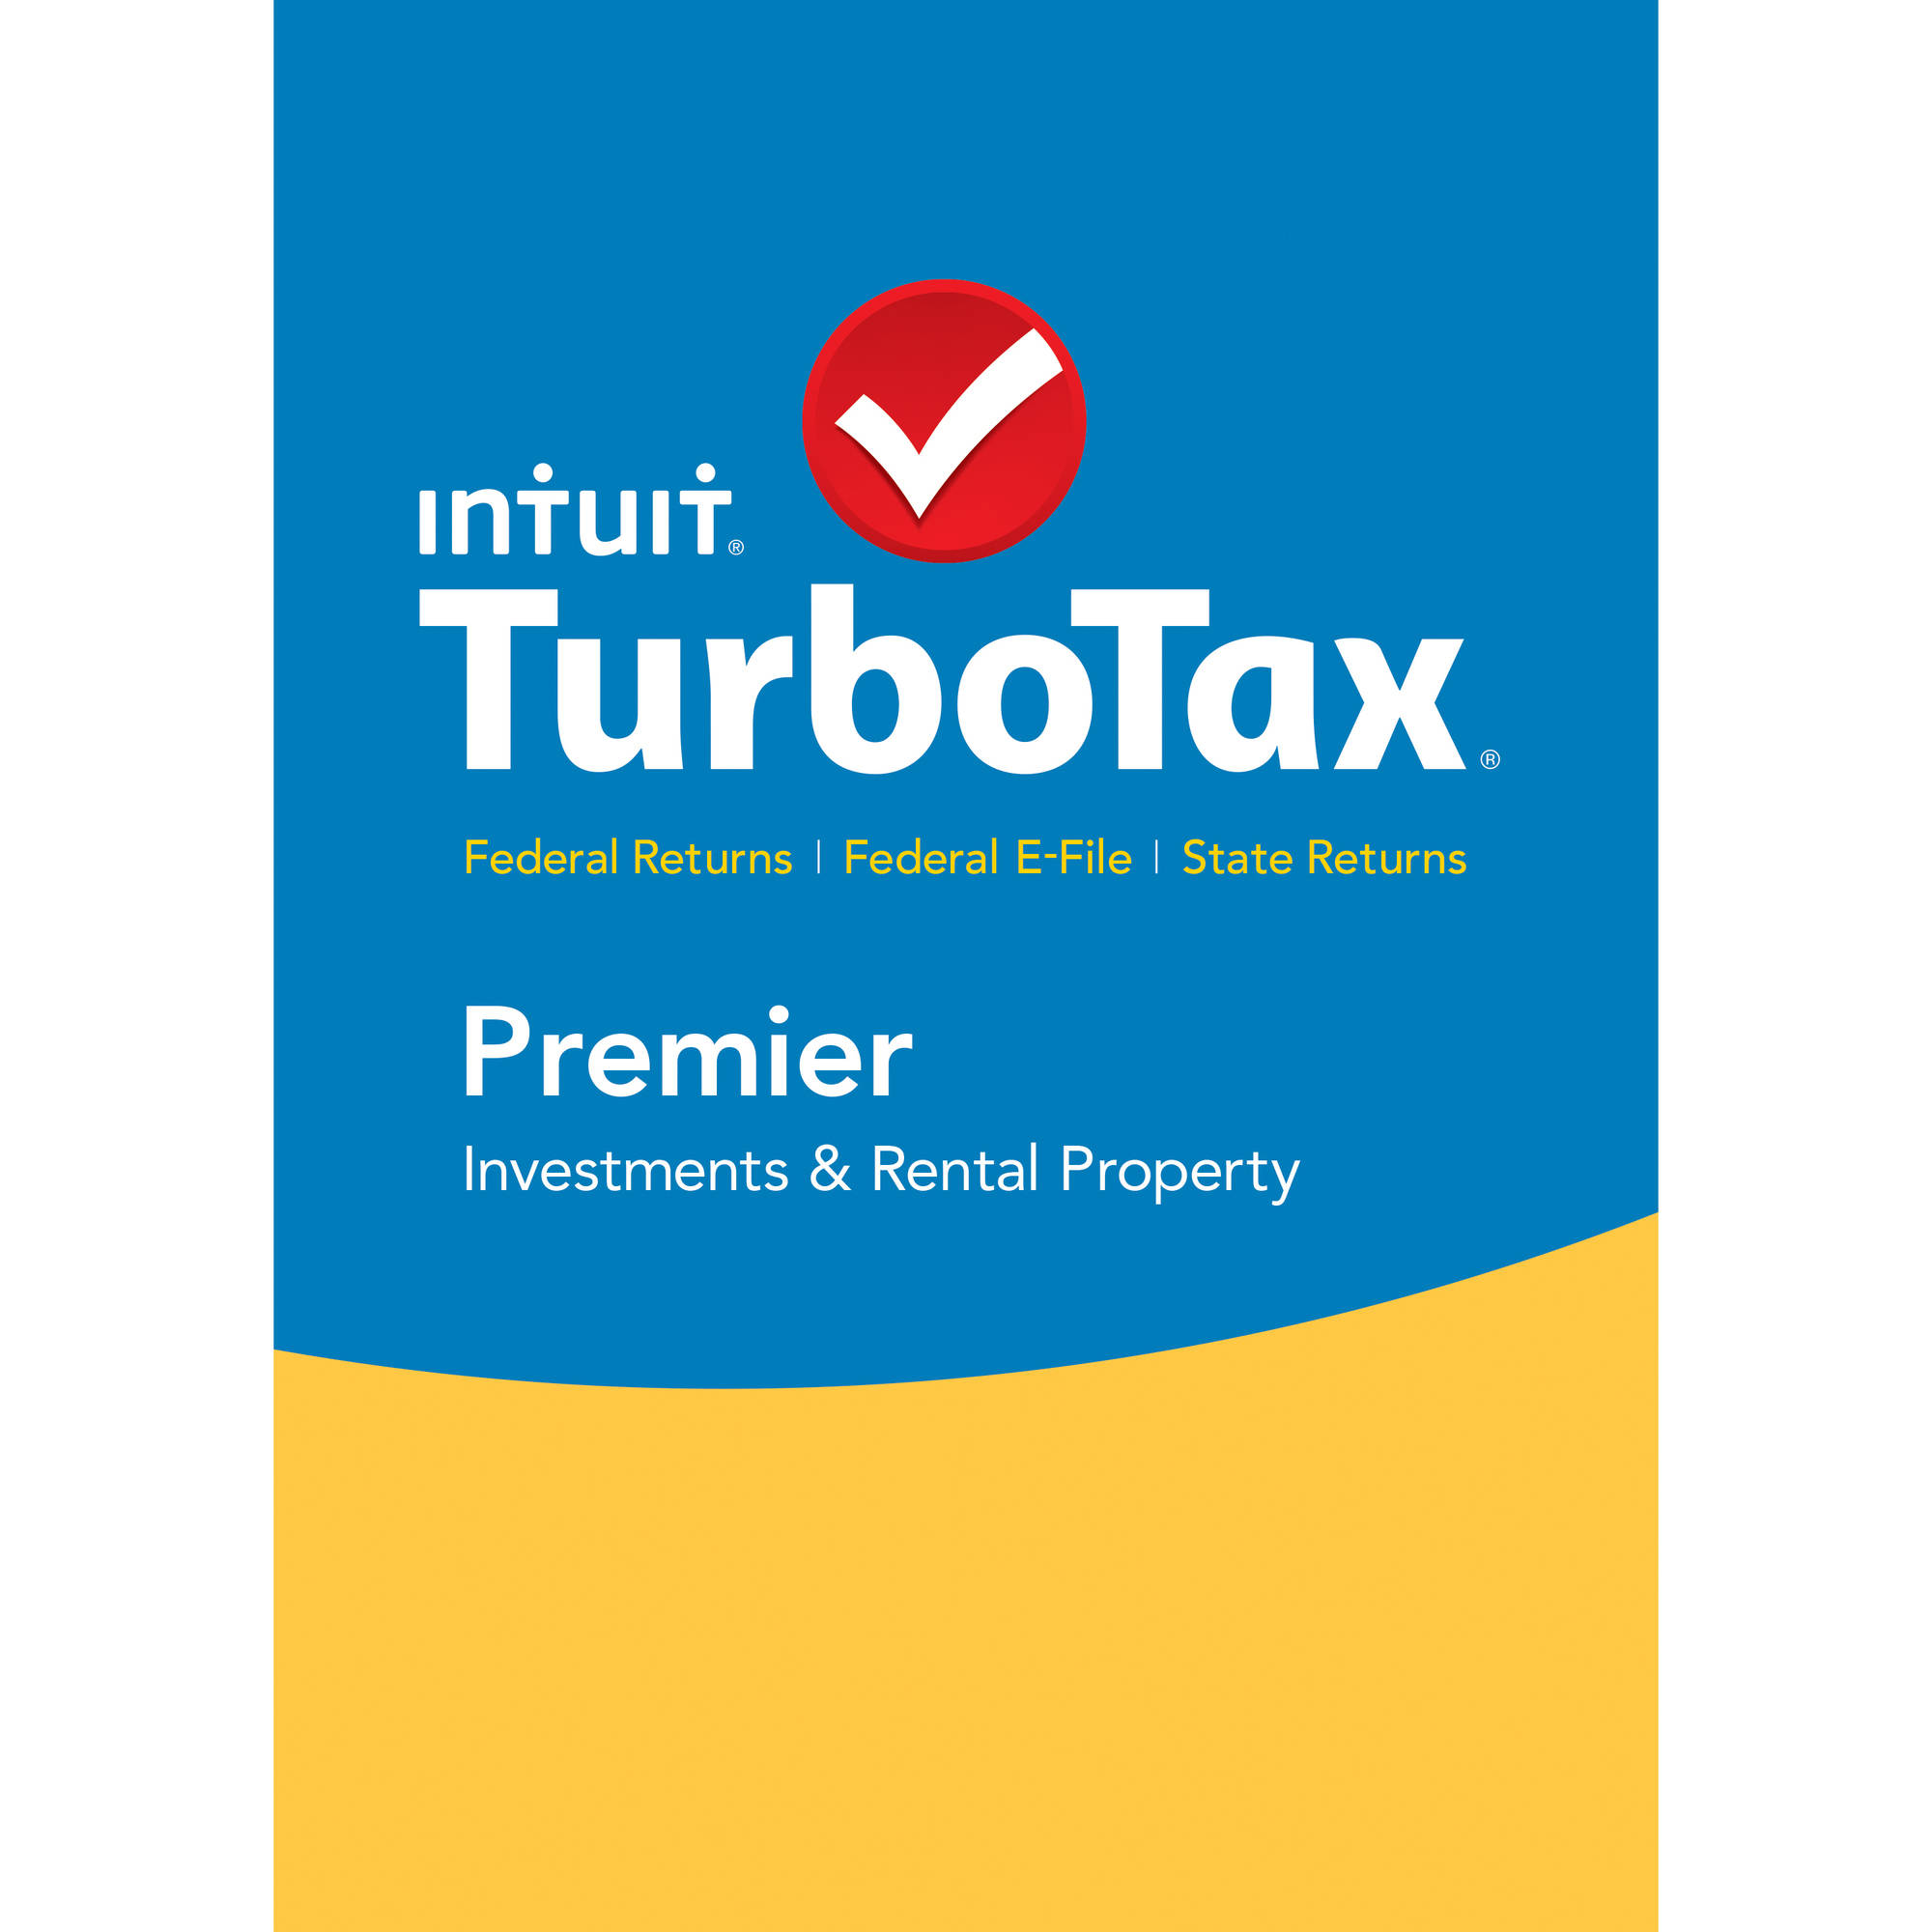 Turbotax 2017 torrent search